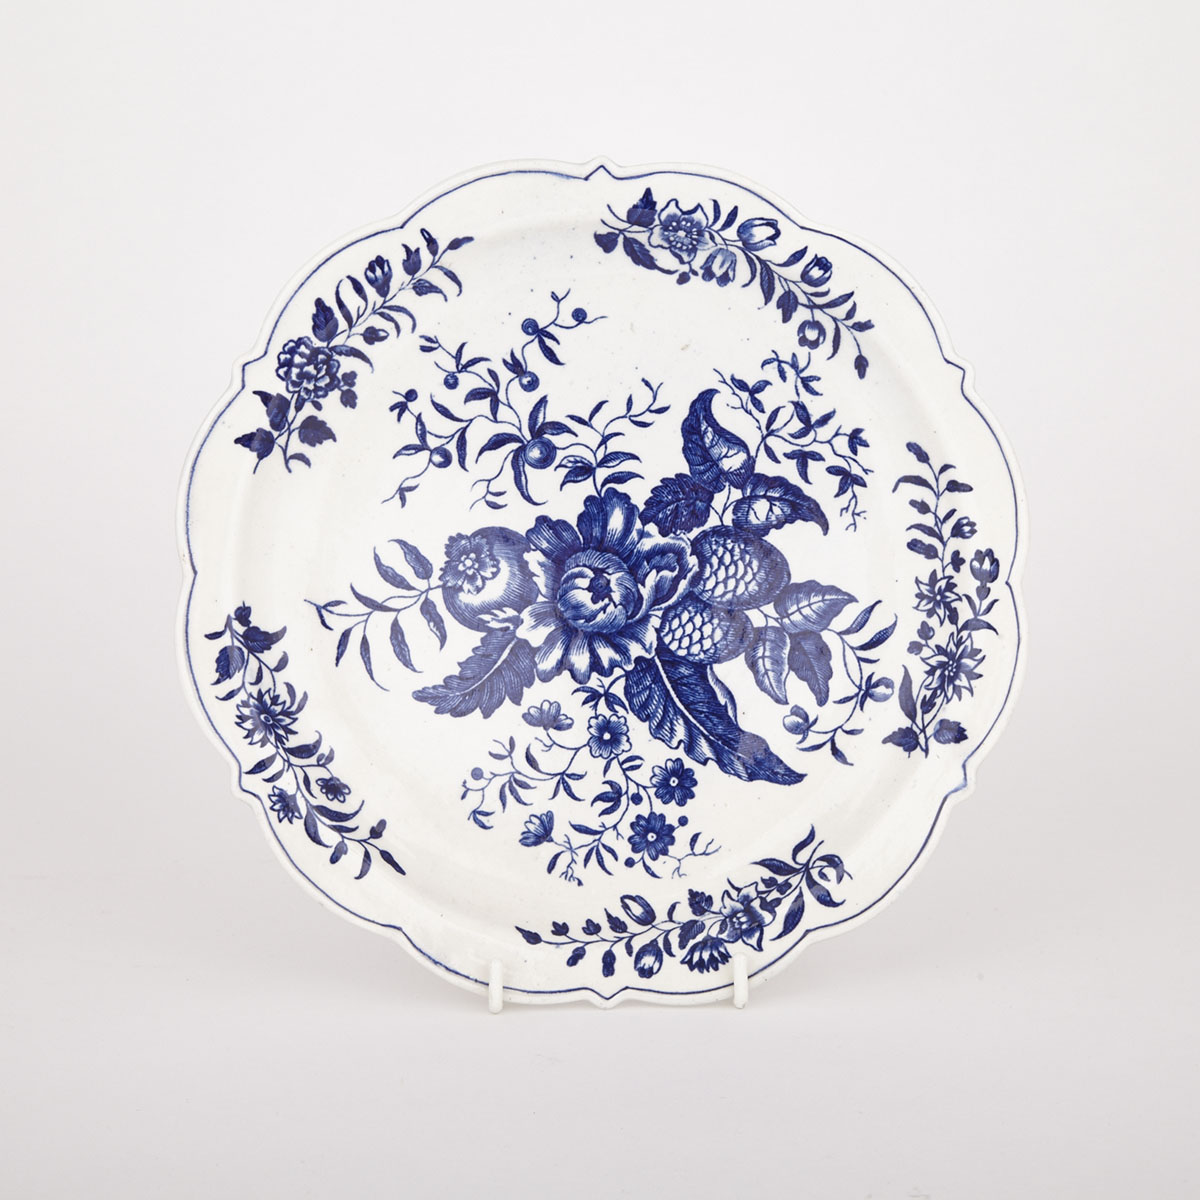 Worcester ‘Pine Cone’ Pattern Plate, c.1770-85